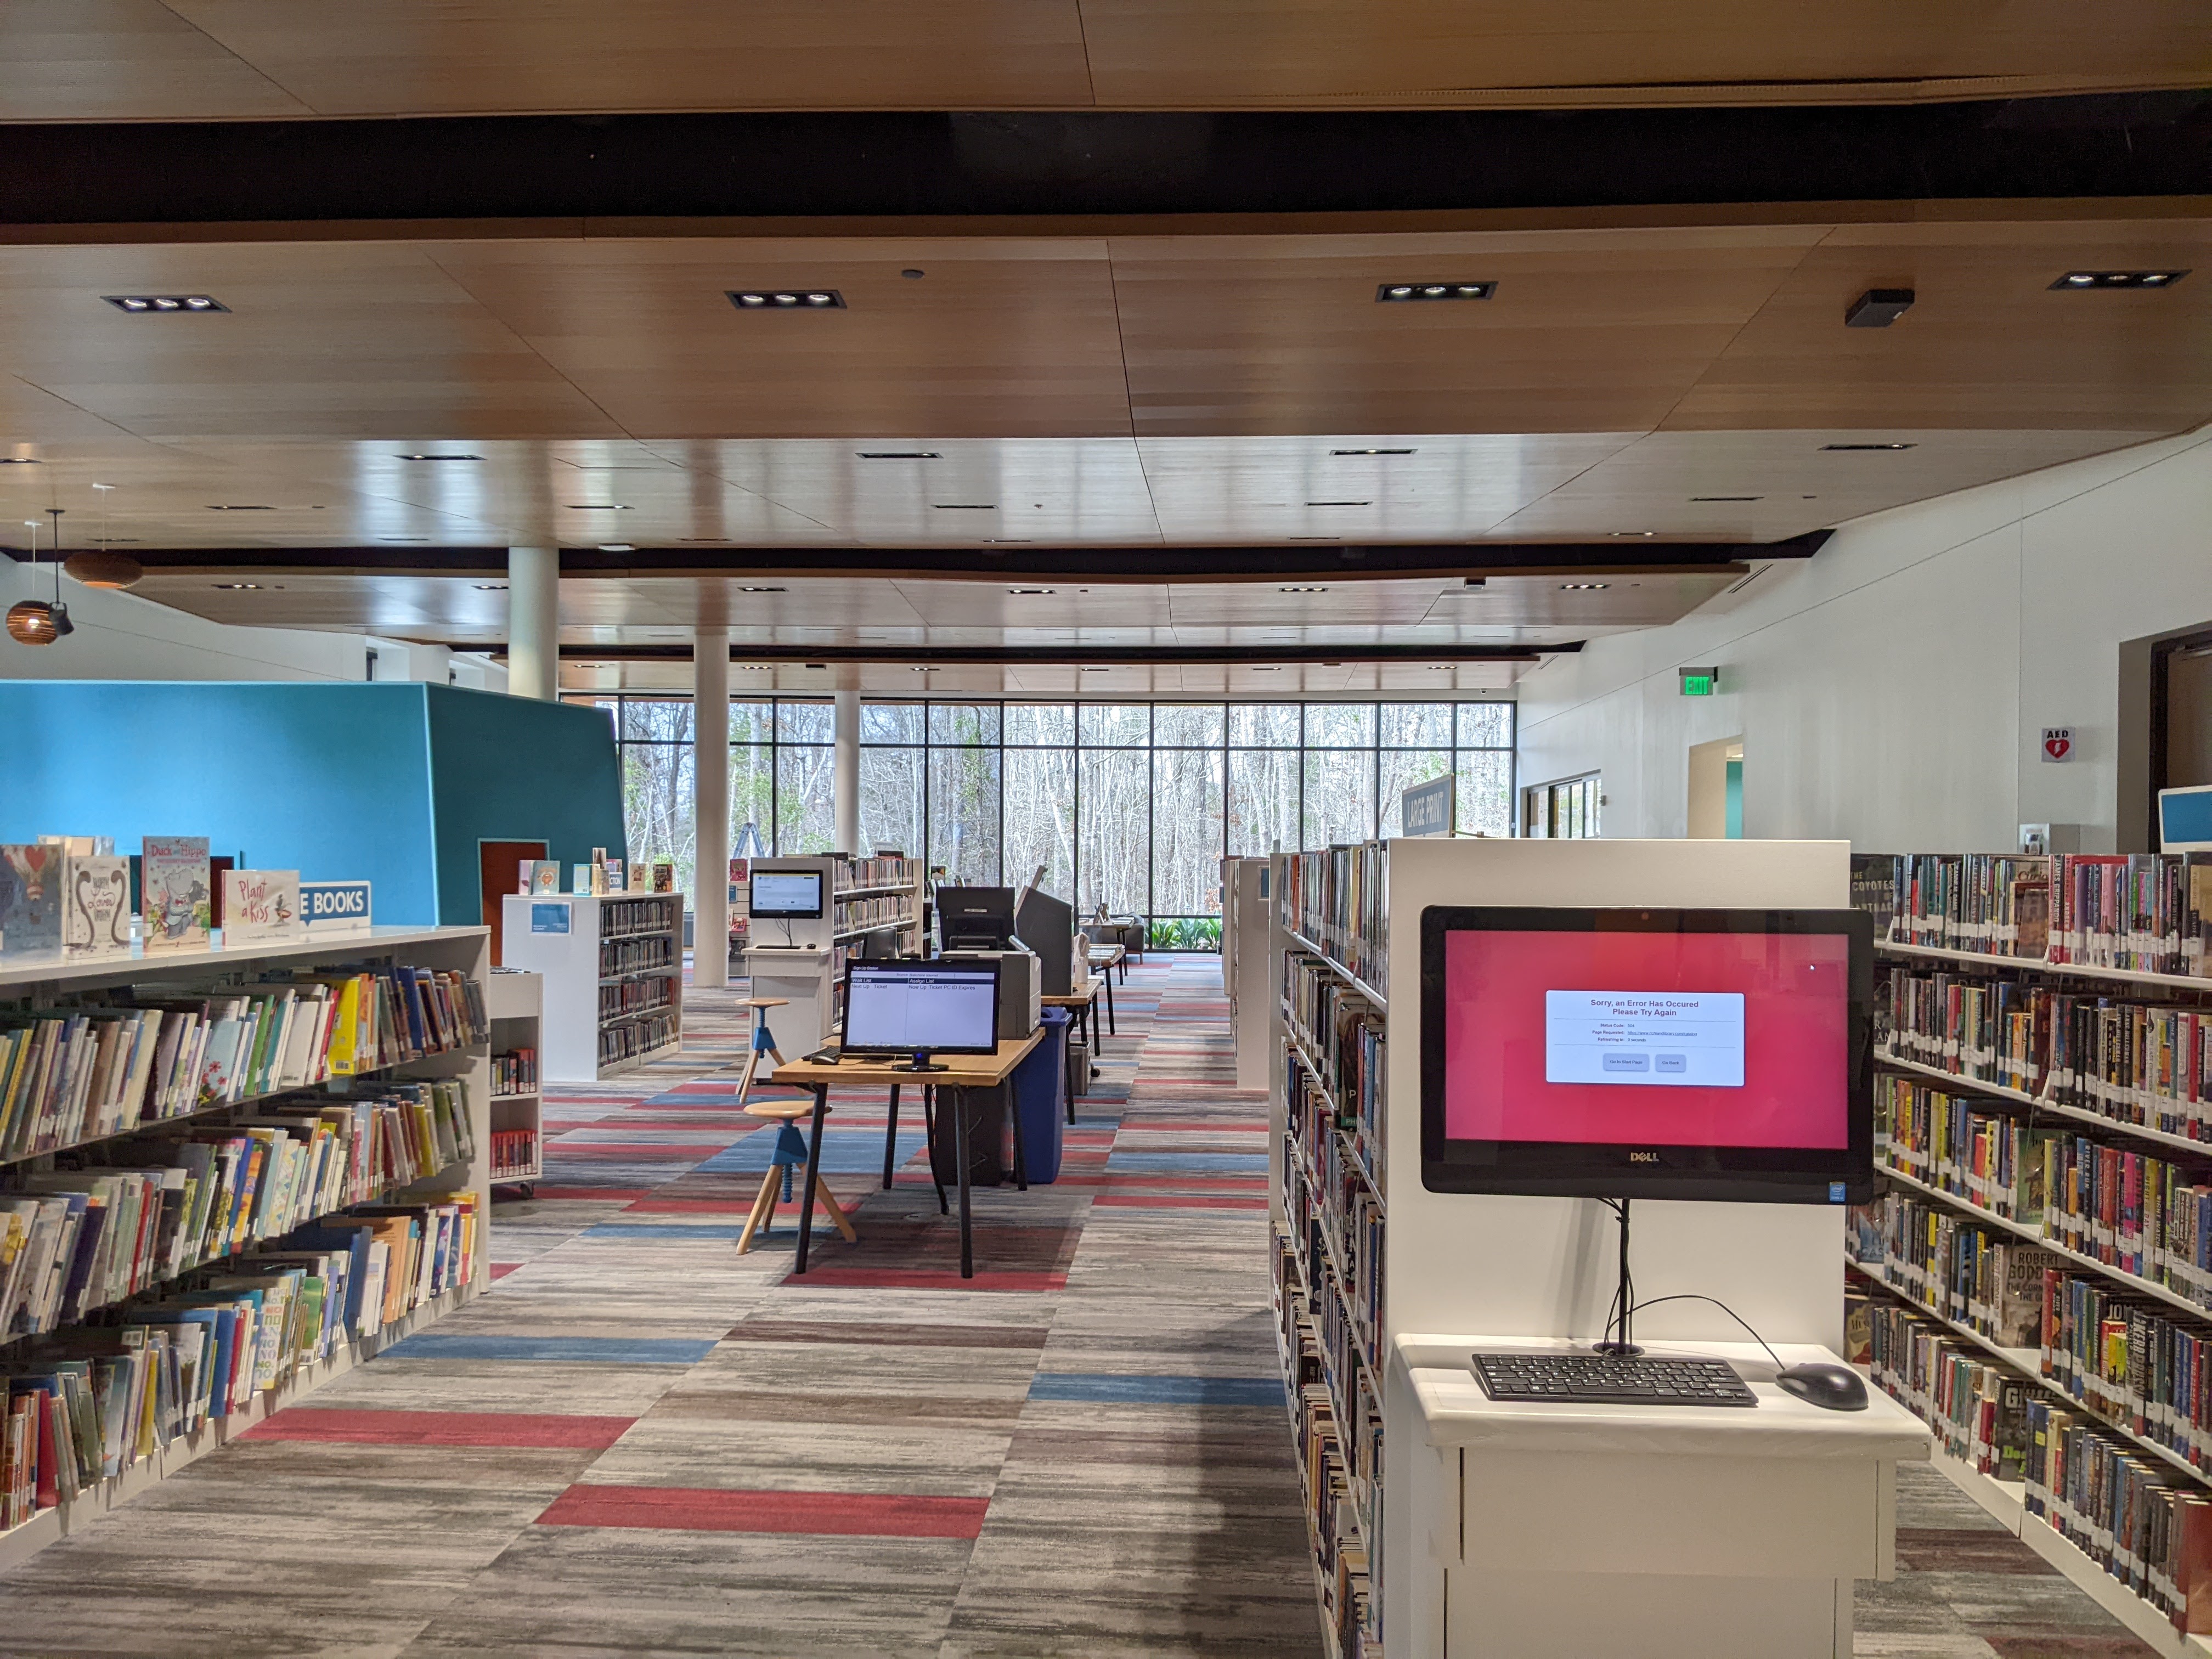 From inside the library. Installed panels are on the left and bare windows are on the right.